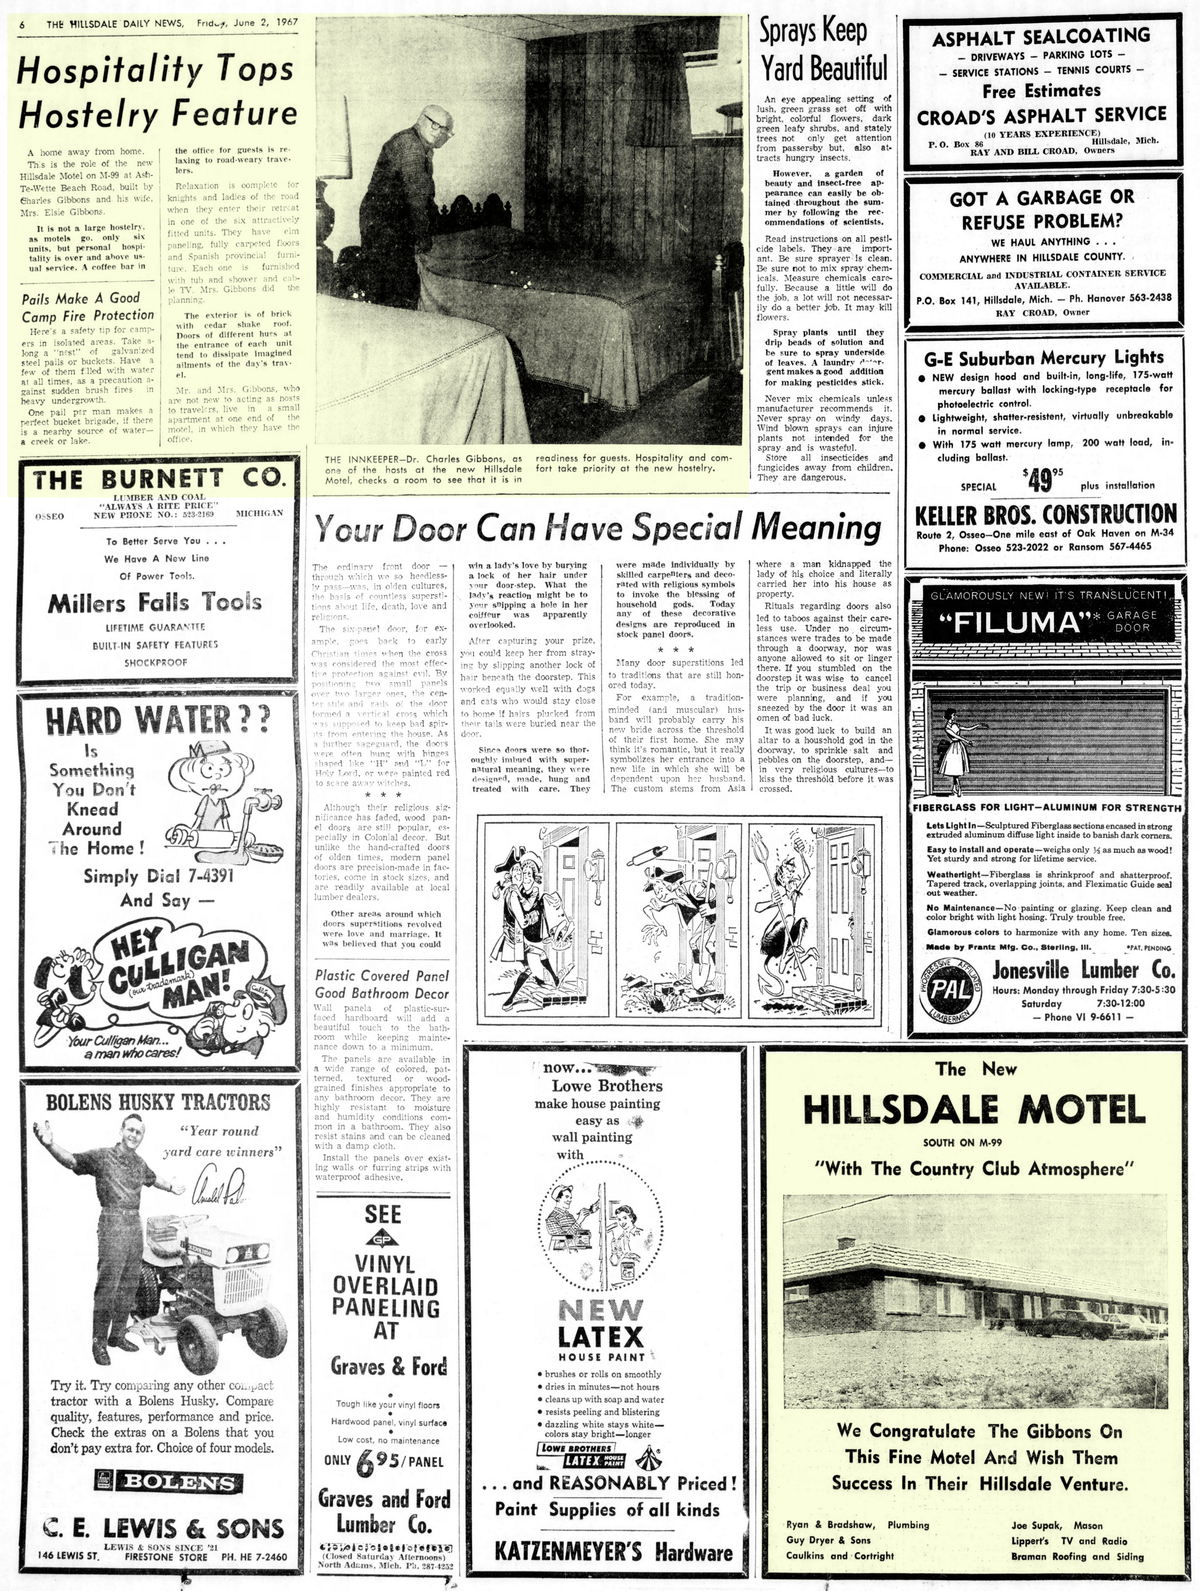 Baw Beese Inn (Hillsdale Motel) - June 2 1967 Article And Ad